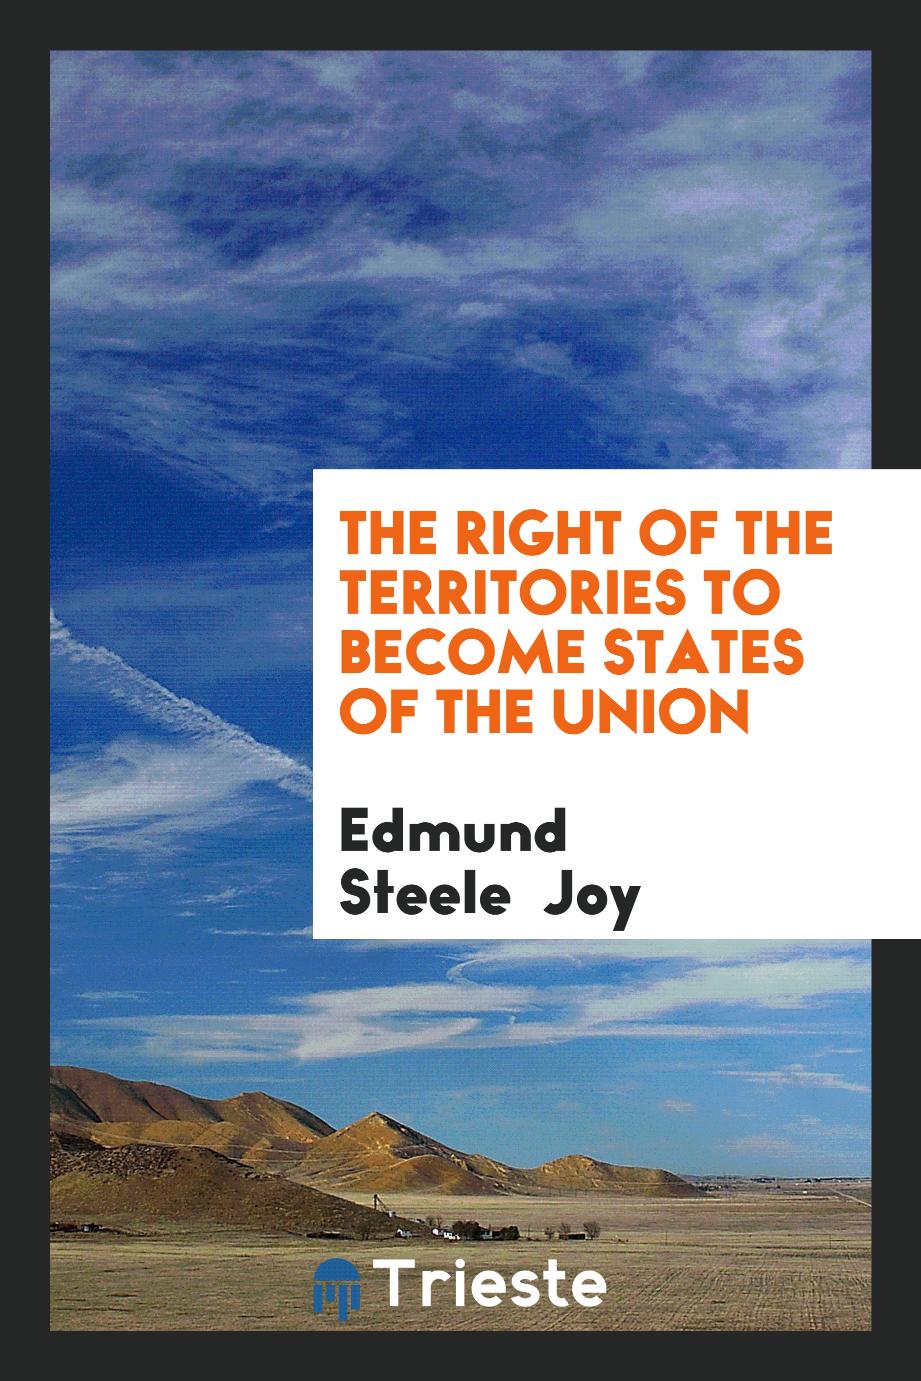 The Right of the Territories to Become States of the Union